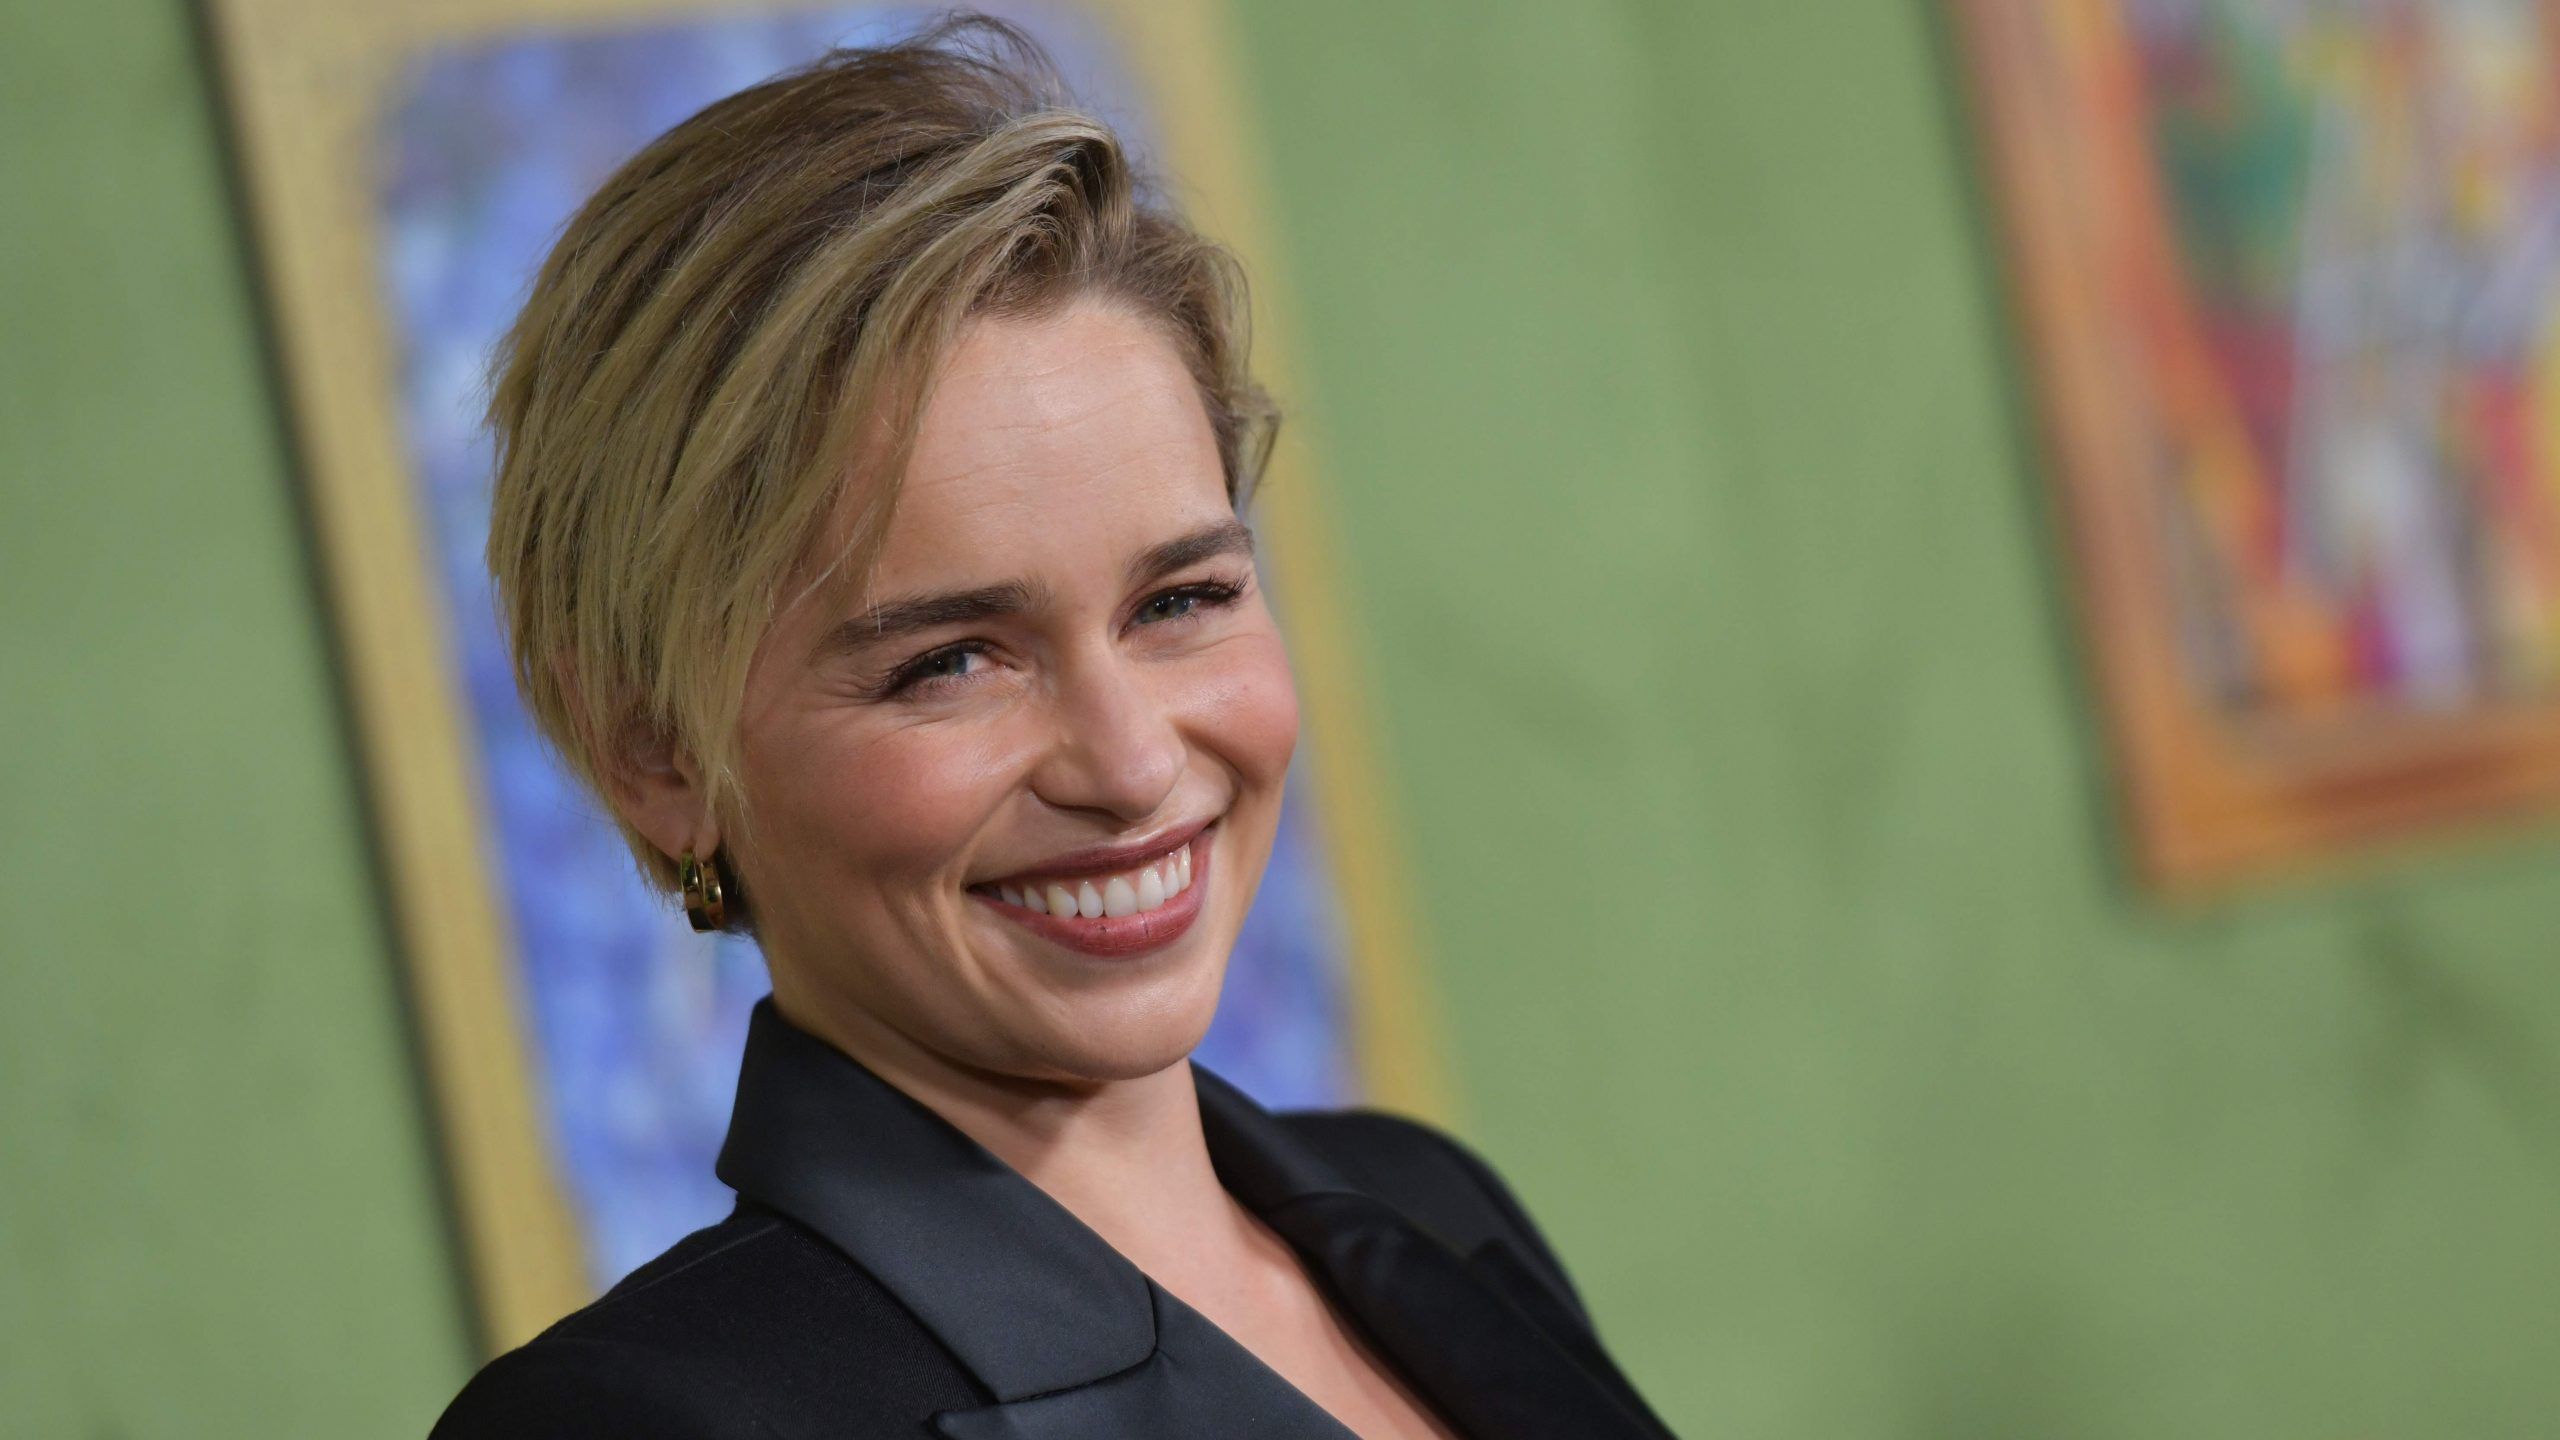 After her first aneurysm, Emilia Clarke had aphasia, a brain condition that affects the part of the brain that controls language and speech. (Photo by CHRIS DELMAS / AFP)CHRIS DELMAS/AFP/Getty Images